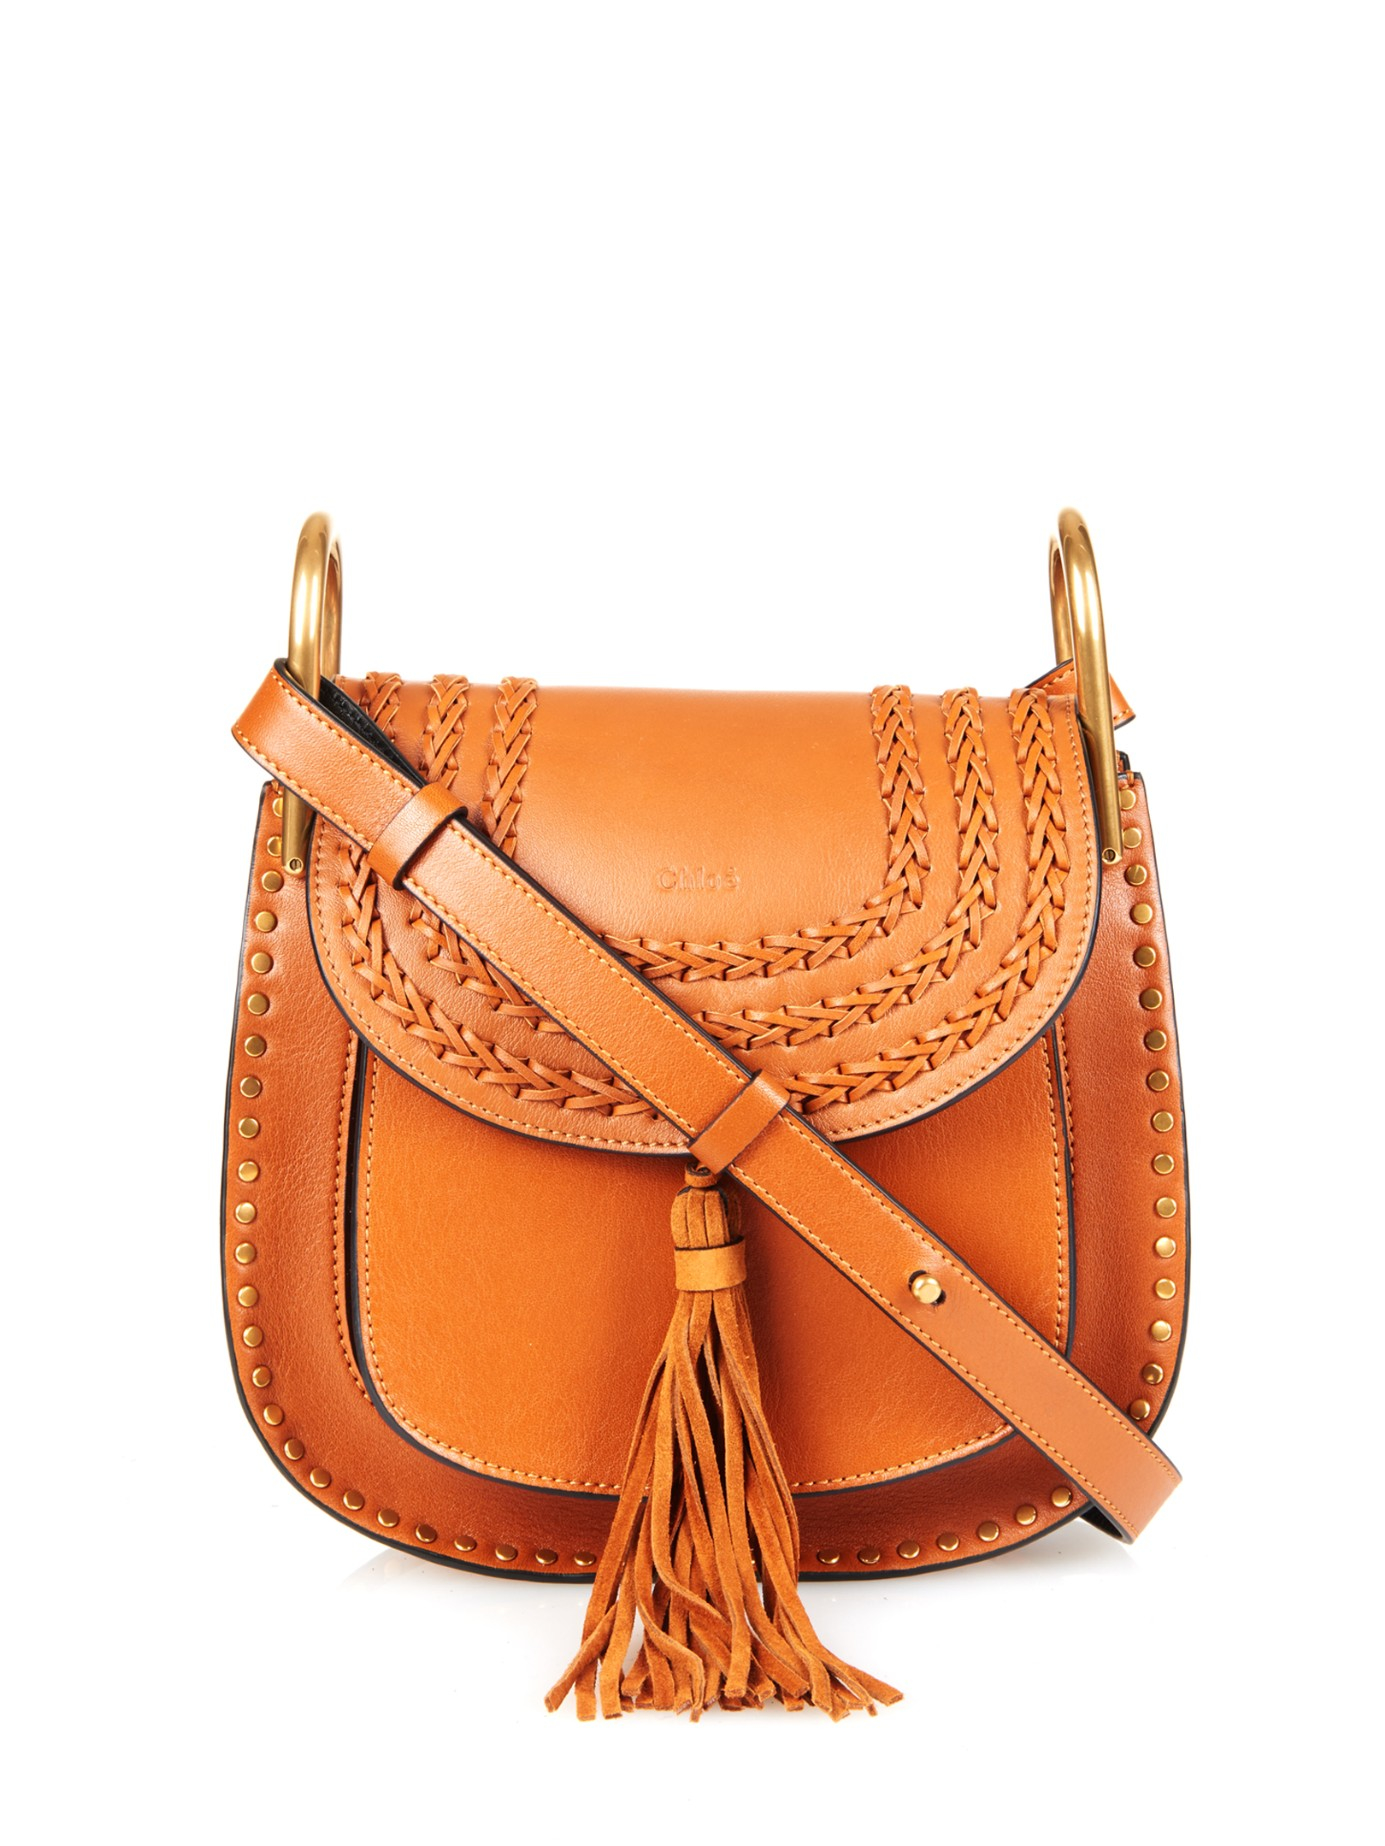 Chloé Hudson Small Leather Cross-Body Bag in Brown | Lyst